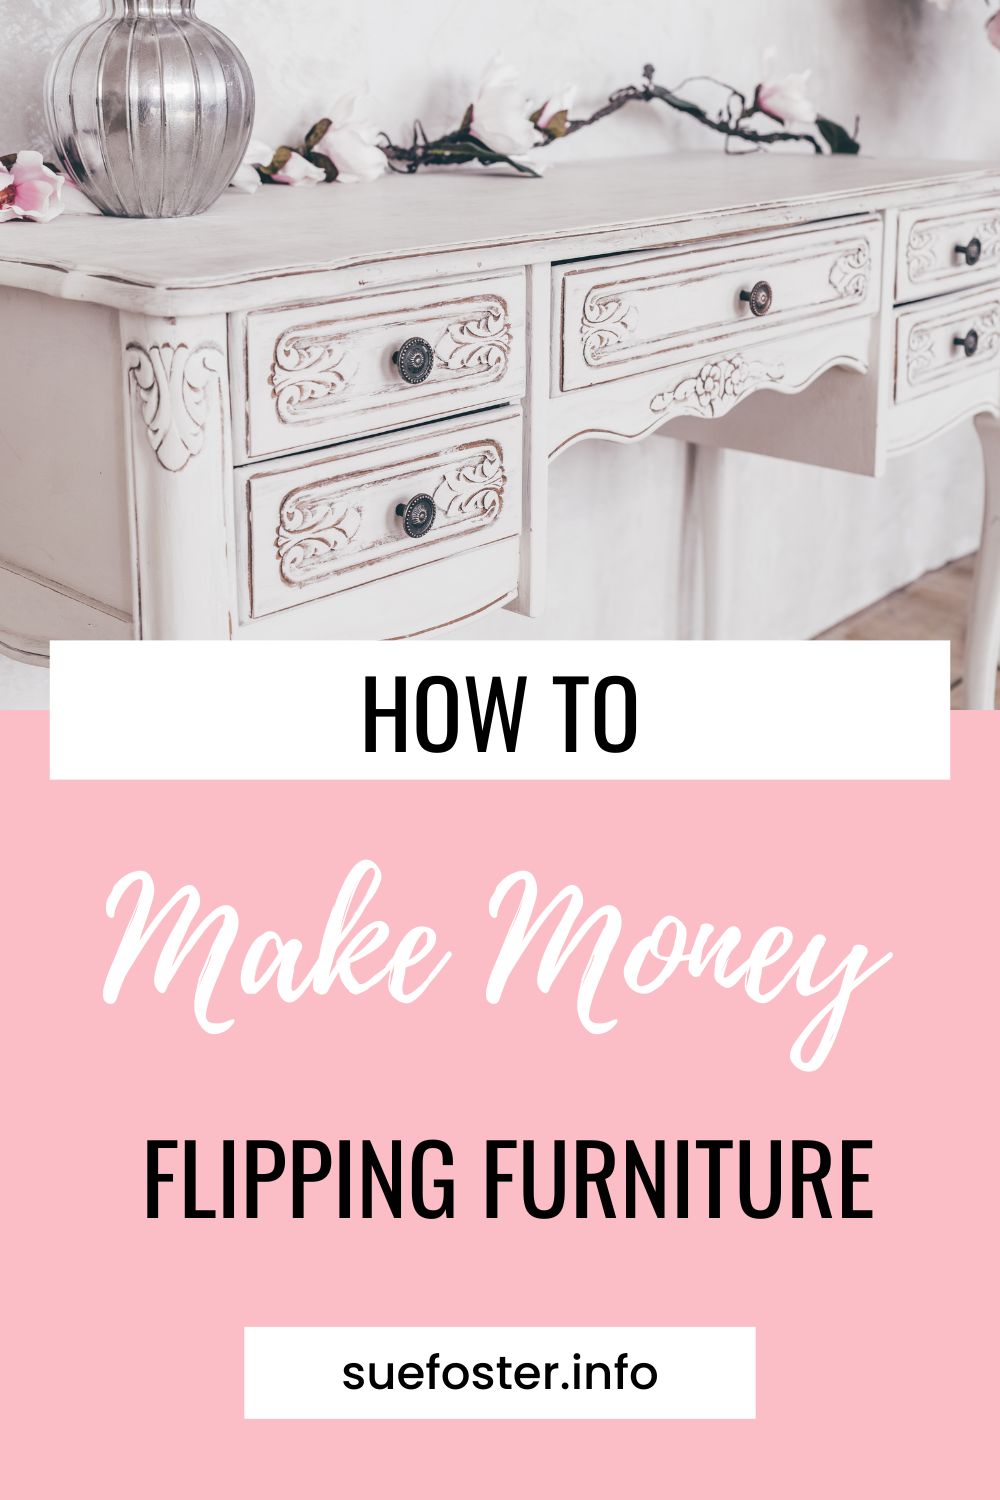 Have you ever thought about flipping furniture to make money? This post will give you a few tips on how to make money flipping furniture.